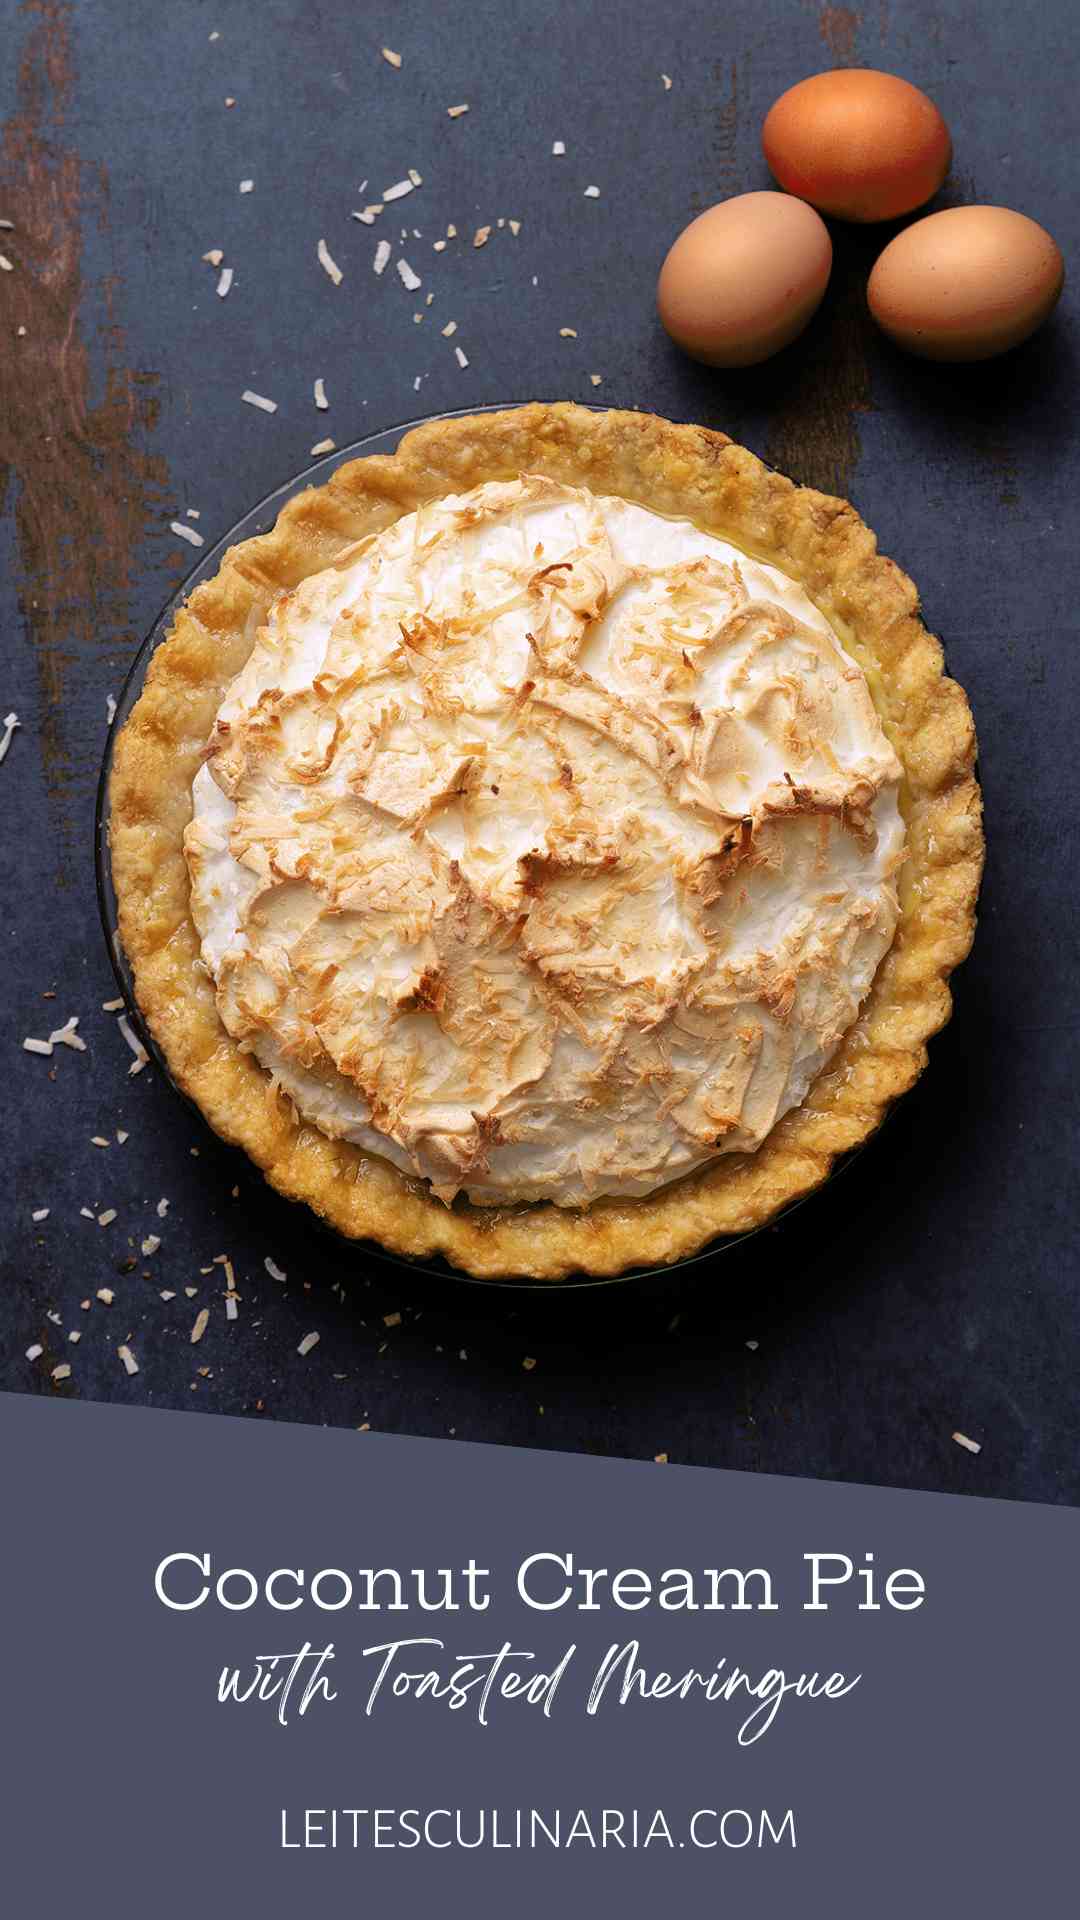 A coconut cream pie with a meringue top and sprinkled with toasted shredded coconut.